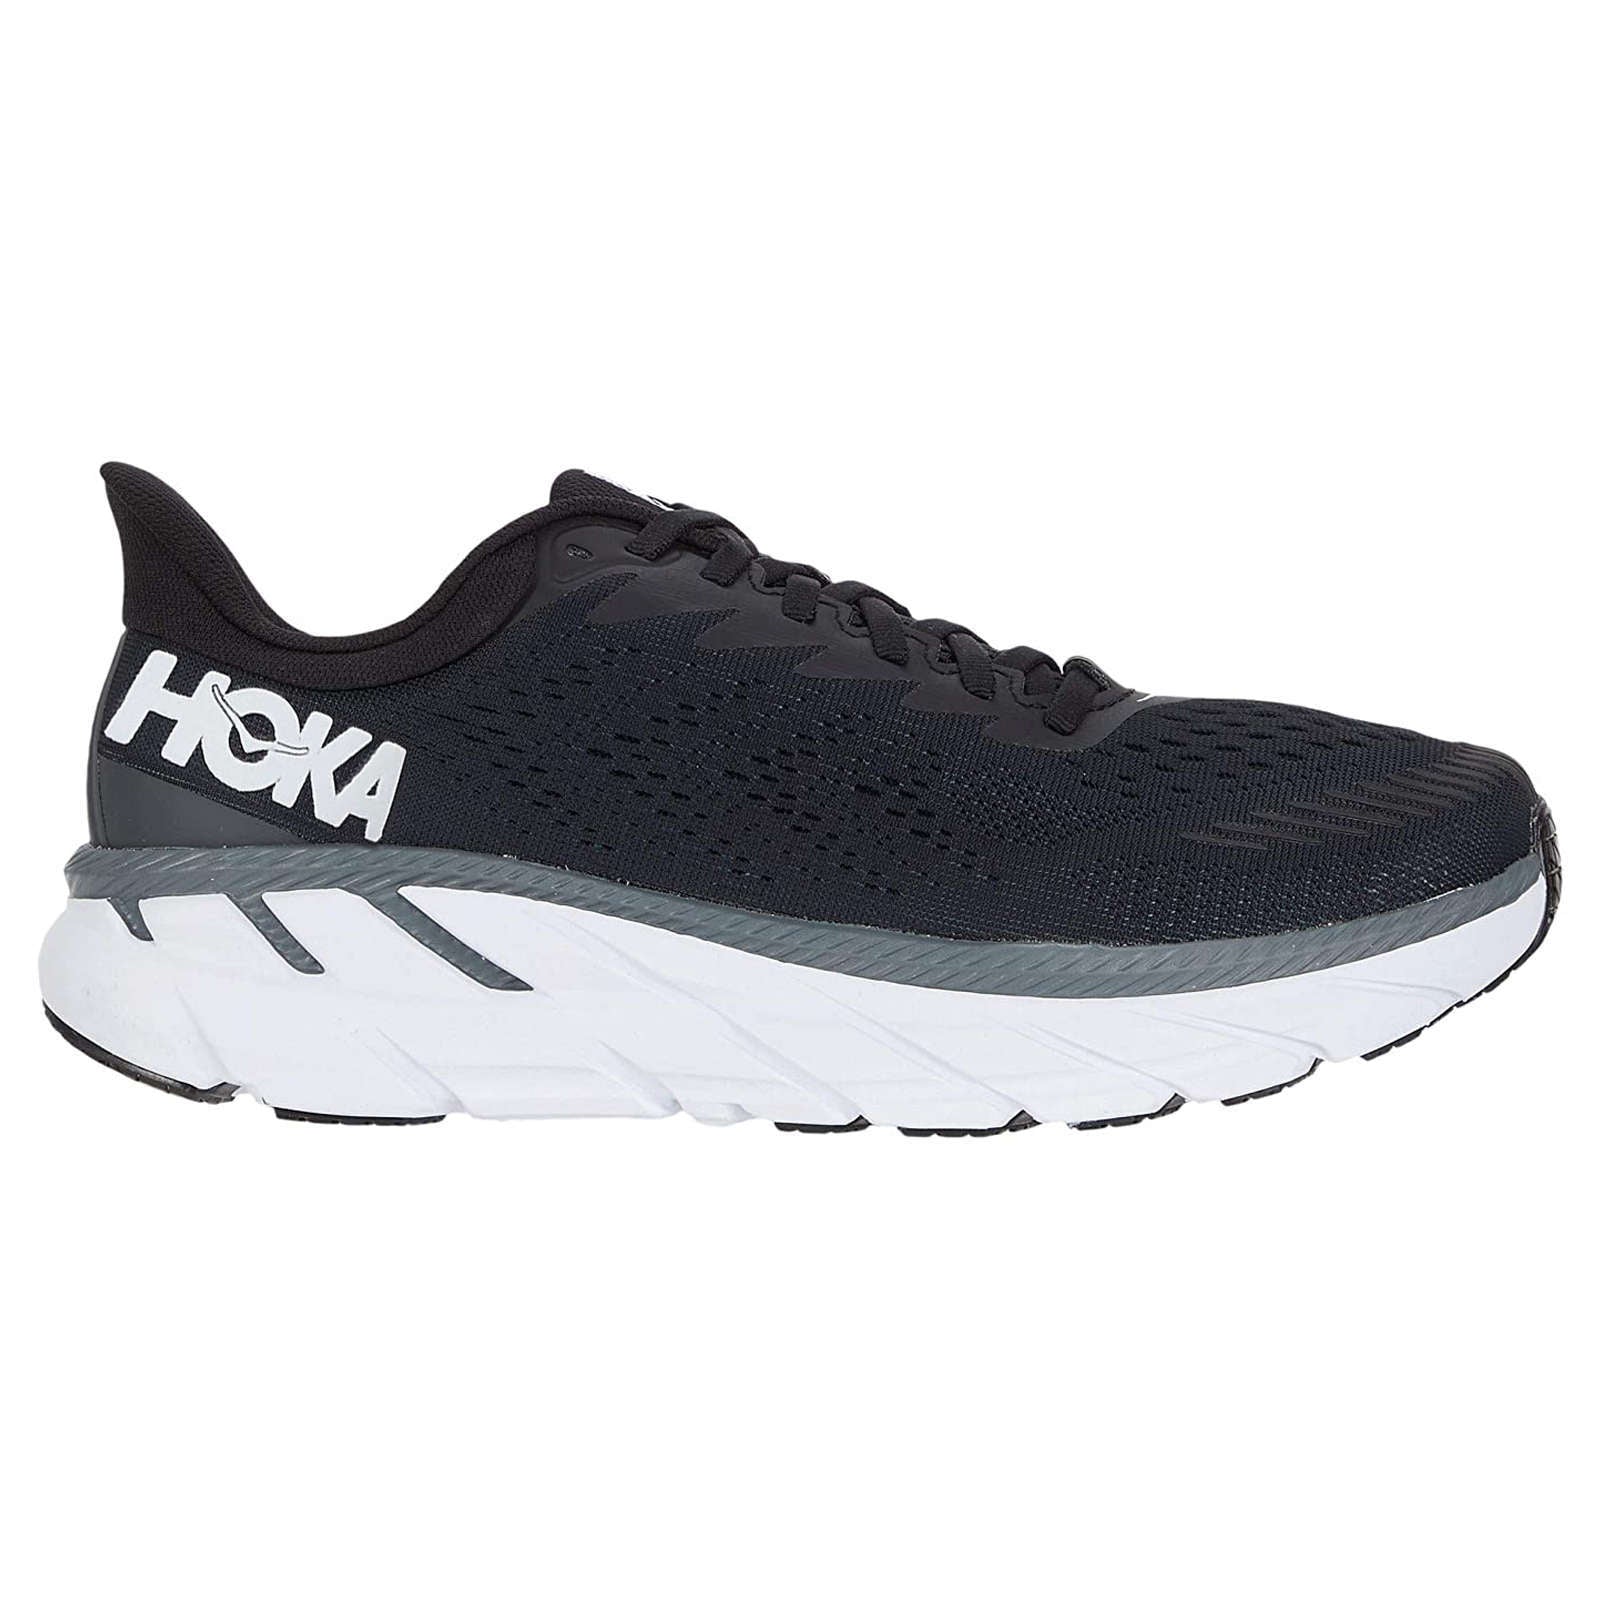 Hoka One One Clifton 7 Mesh Men's Low-Top Road Running Trainers#color_black white